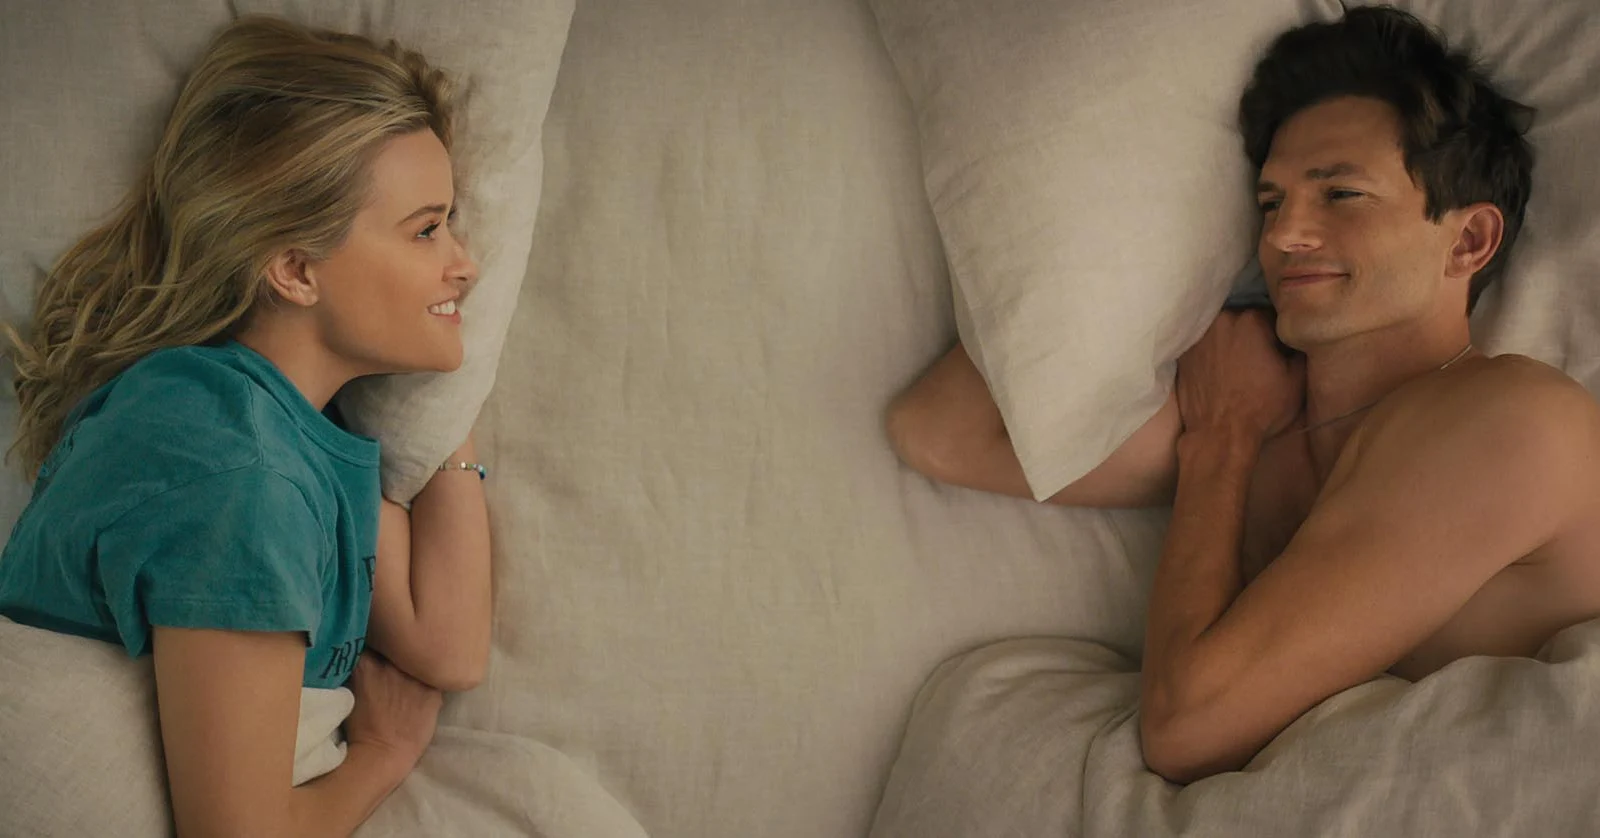 Netflix drops the Trailer for 'Another' Rom-Com for Valentine's Week